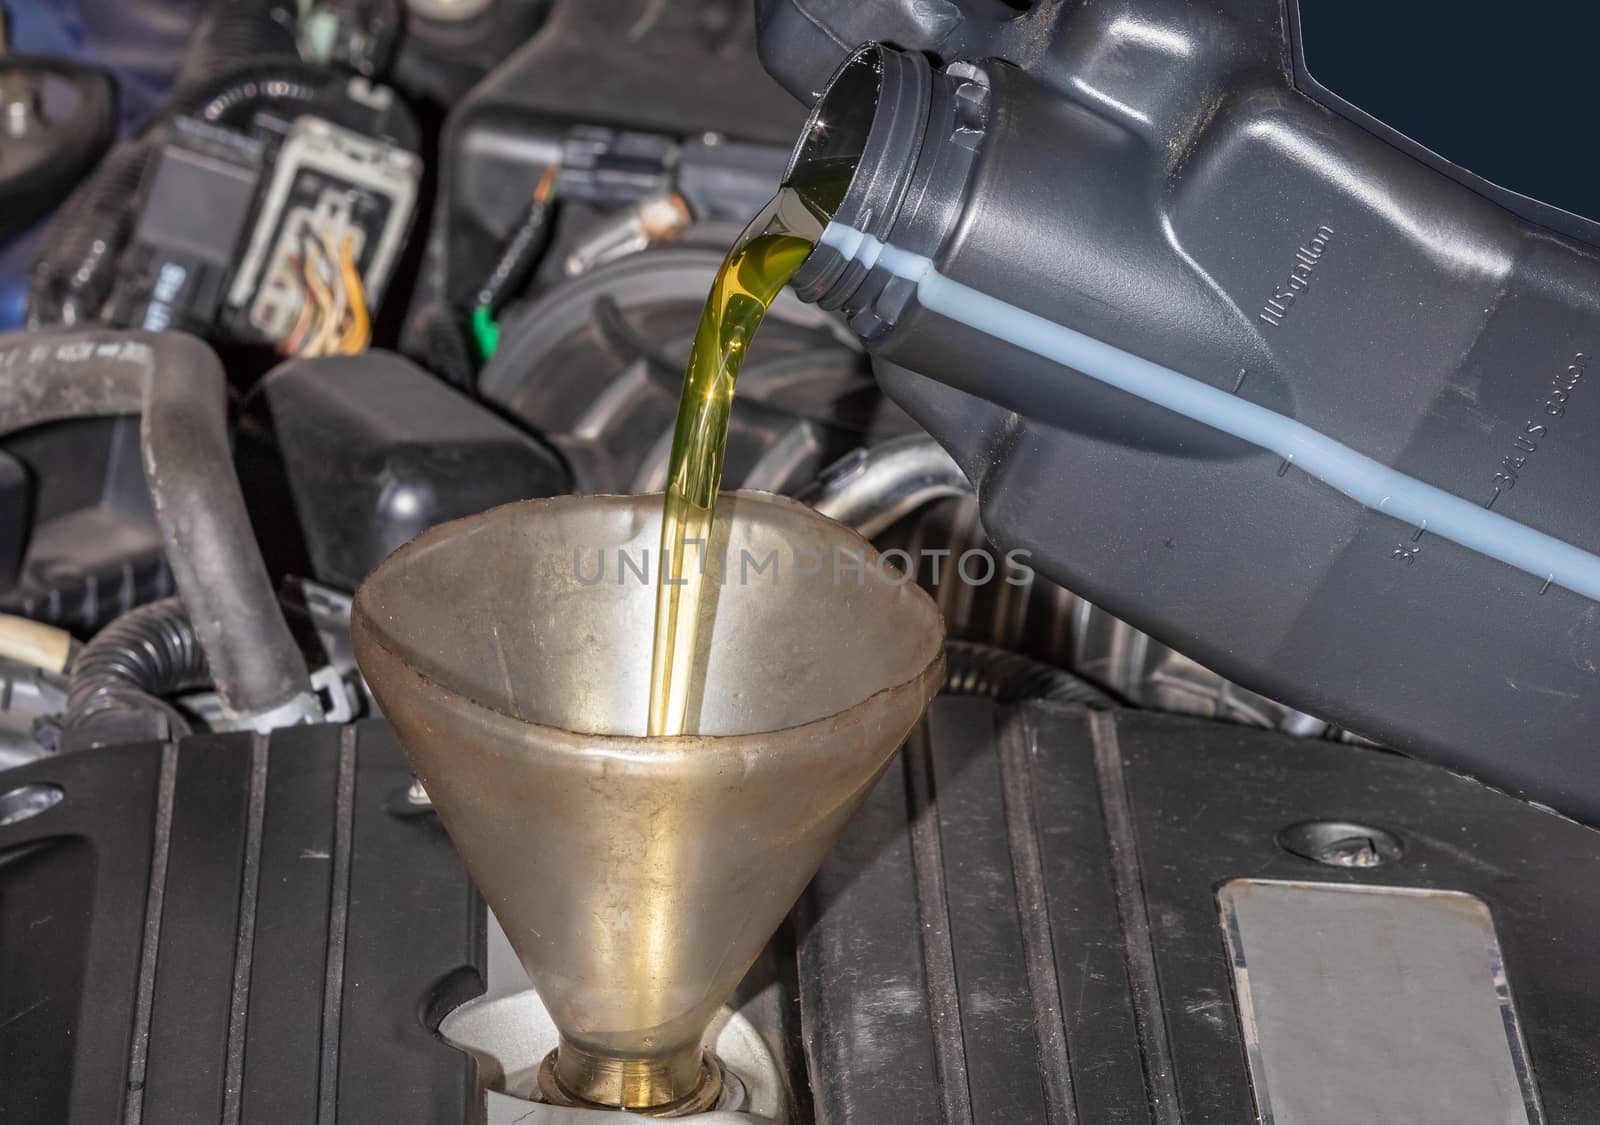 Mechanic topping up the oil in a car pouring a pint of oil through a funnel into the engine, close up of the oil and funnel